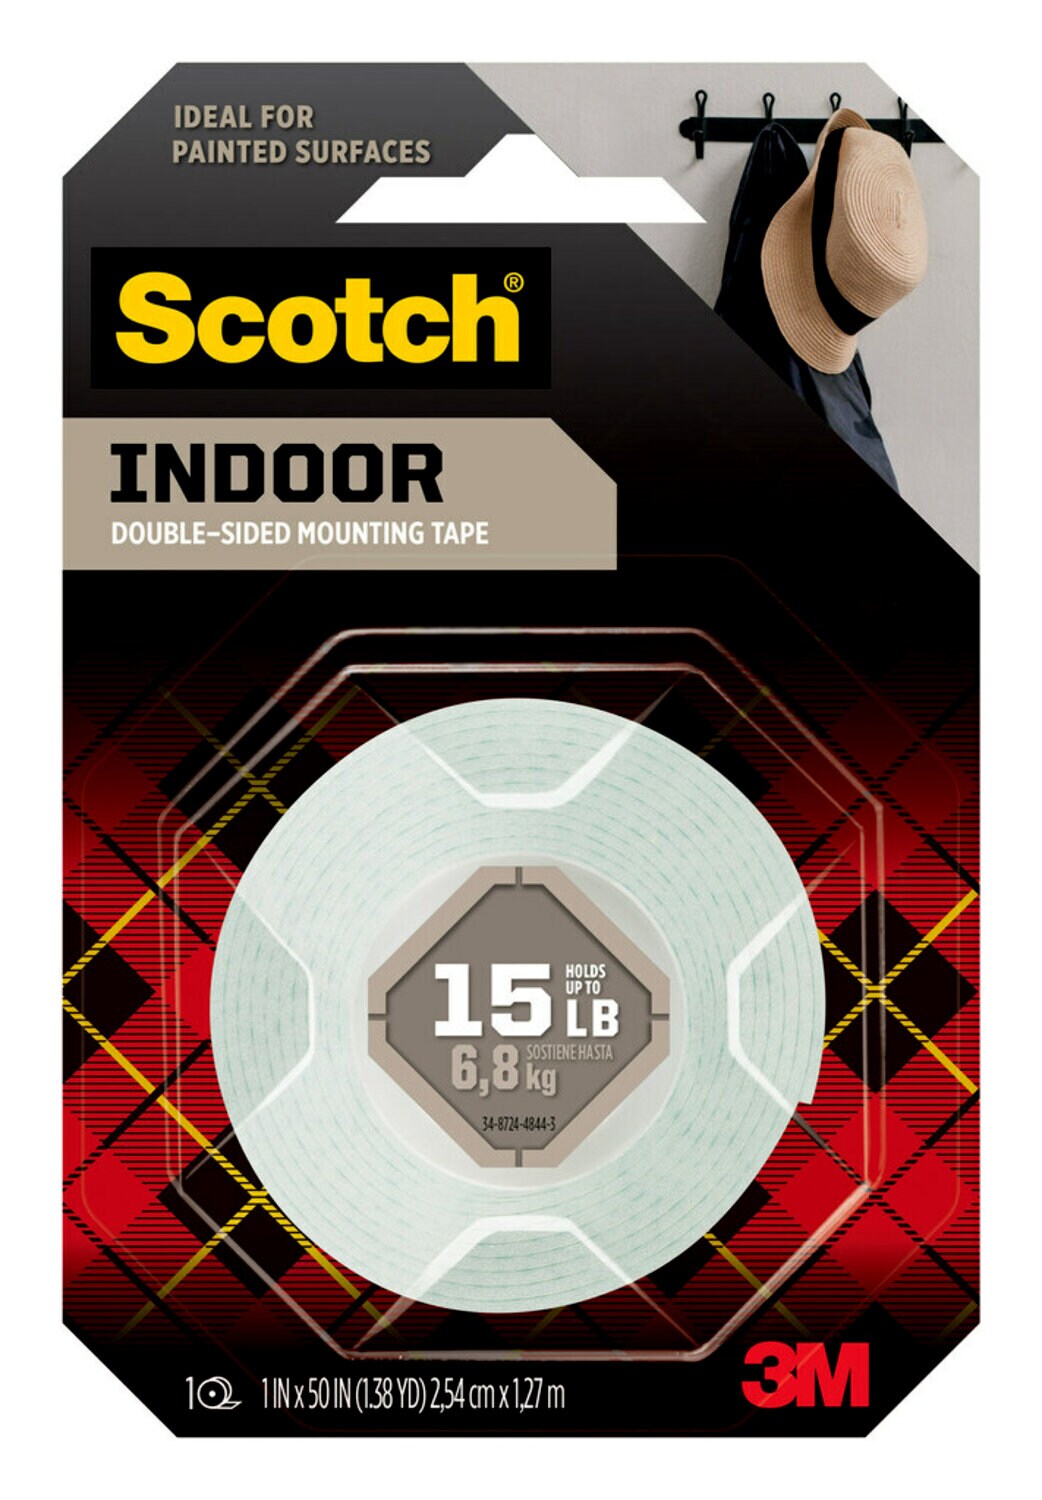 7100241763 - Scotch Indoor Double-Sided Mounting Tape 114S, 1 in x 50 in (2.54 cm x 1.27 m)